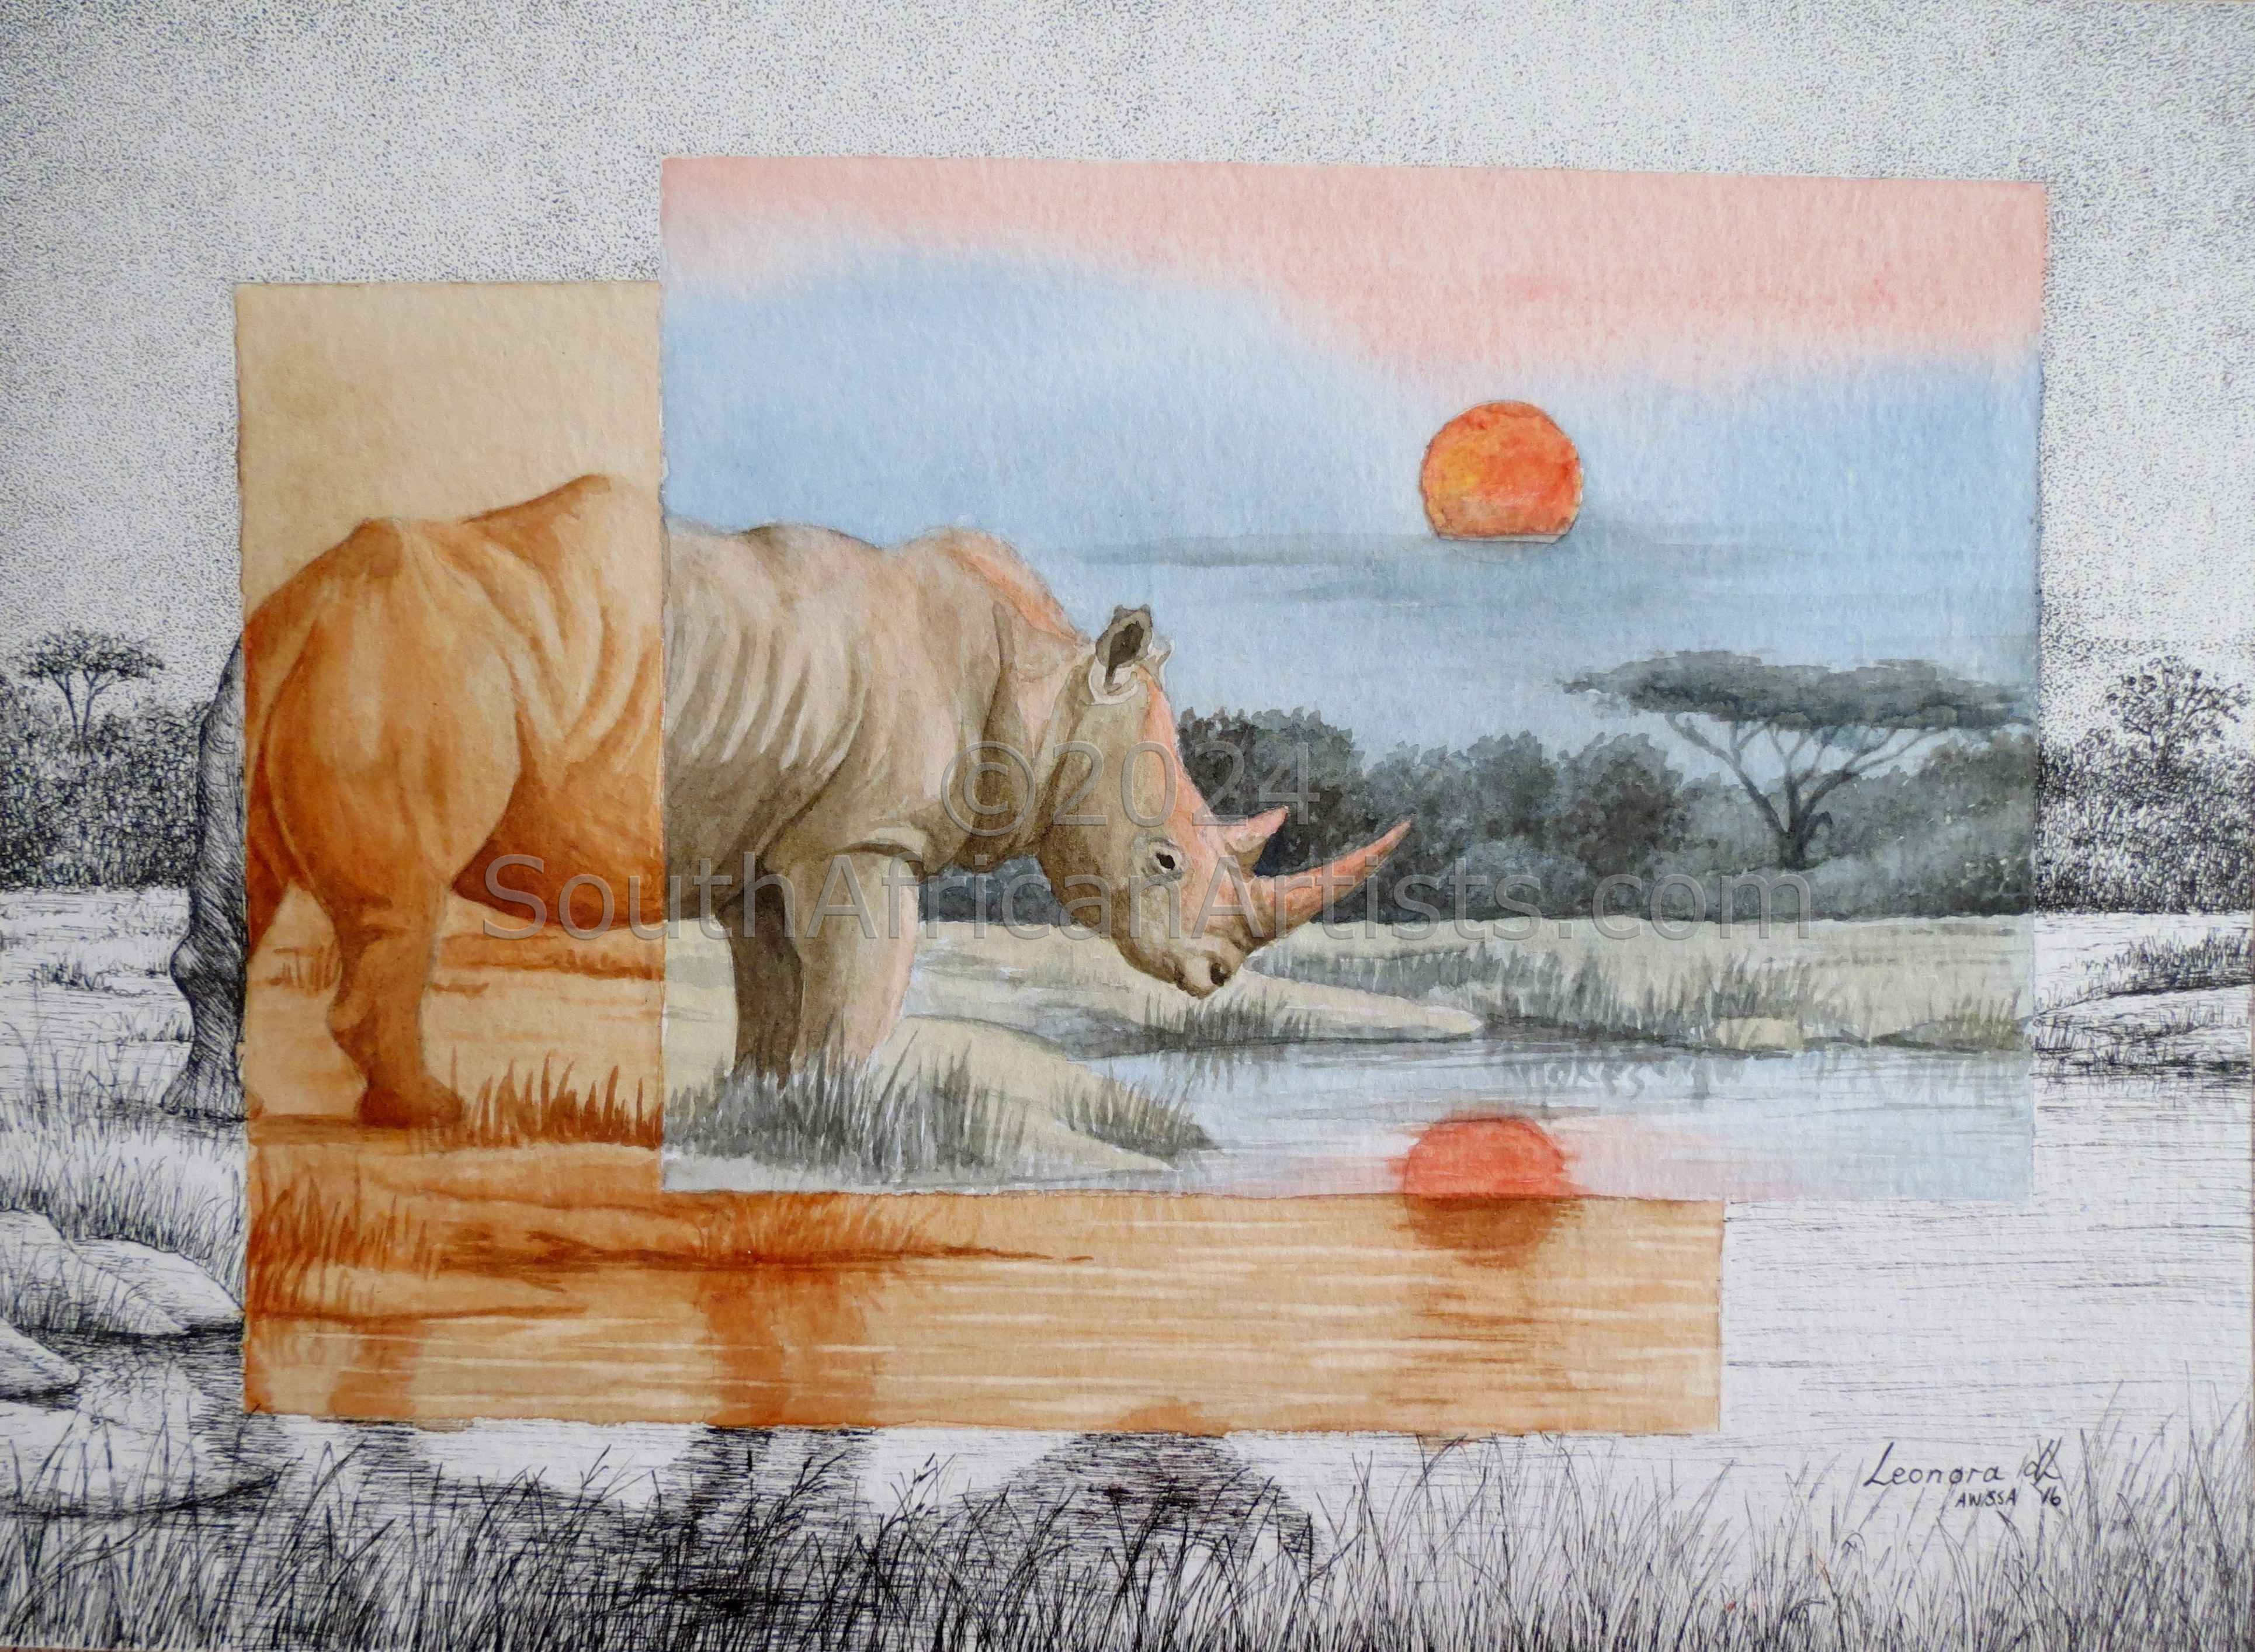 Sunset for the Rhino 